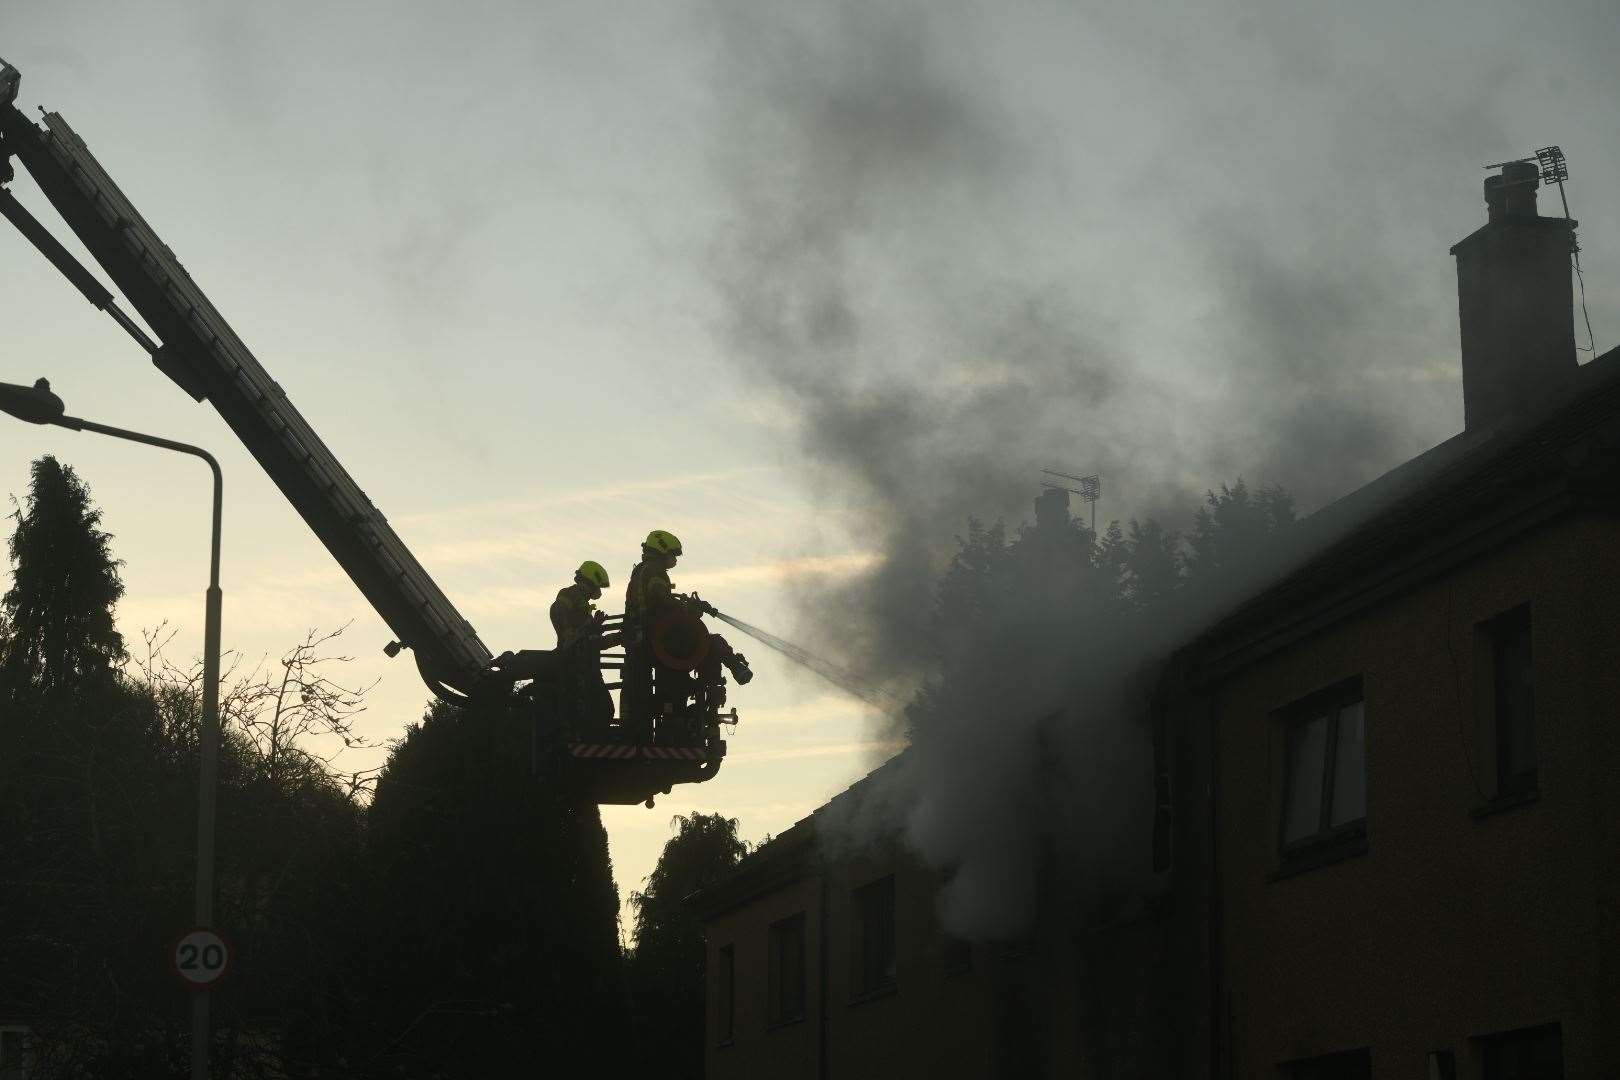 The fire at St Valery Avenue, Dalneigh